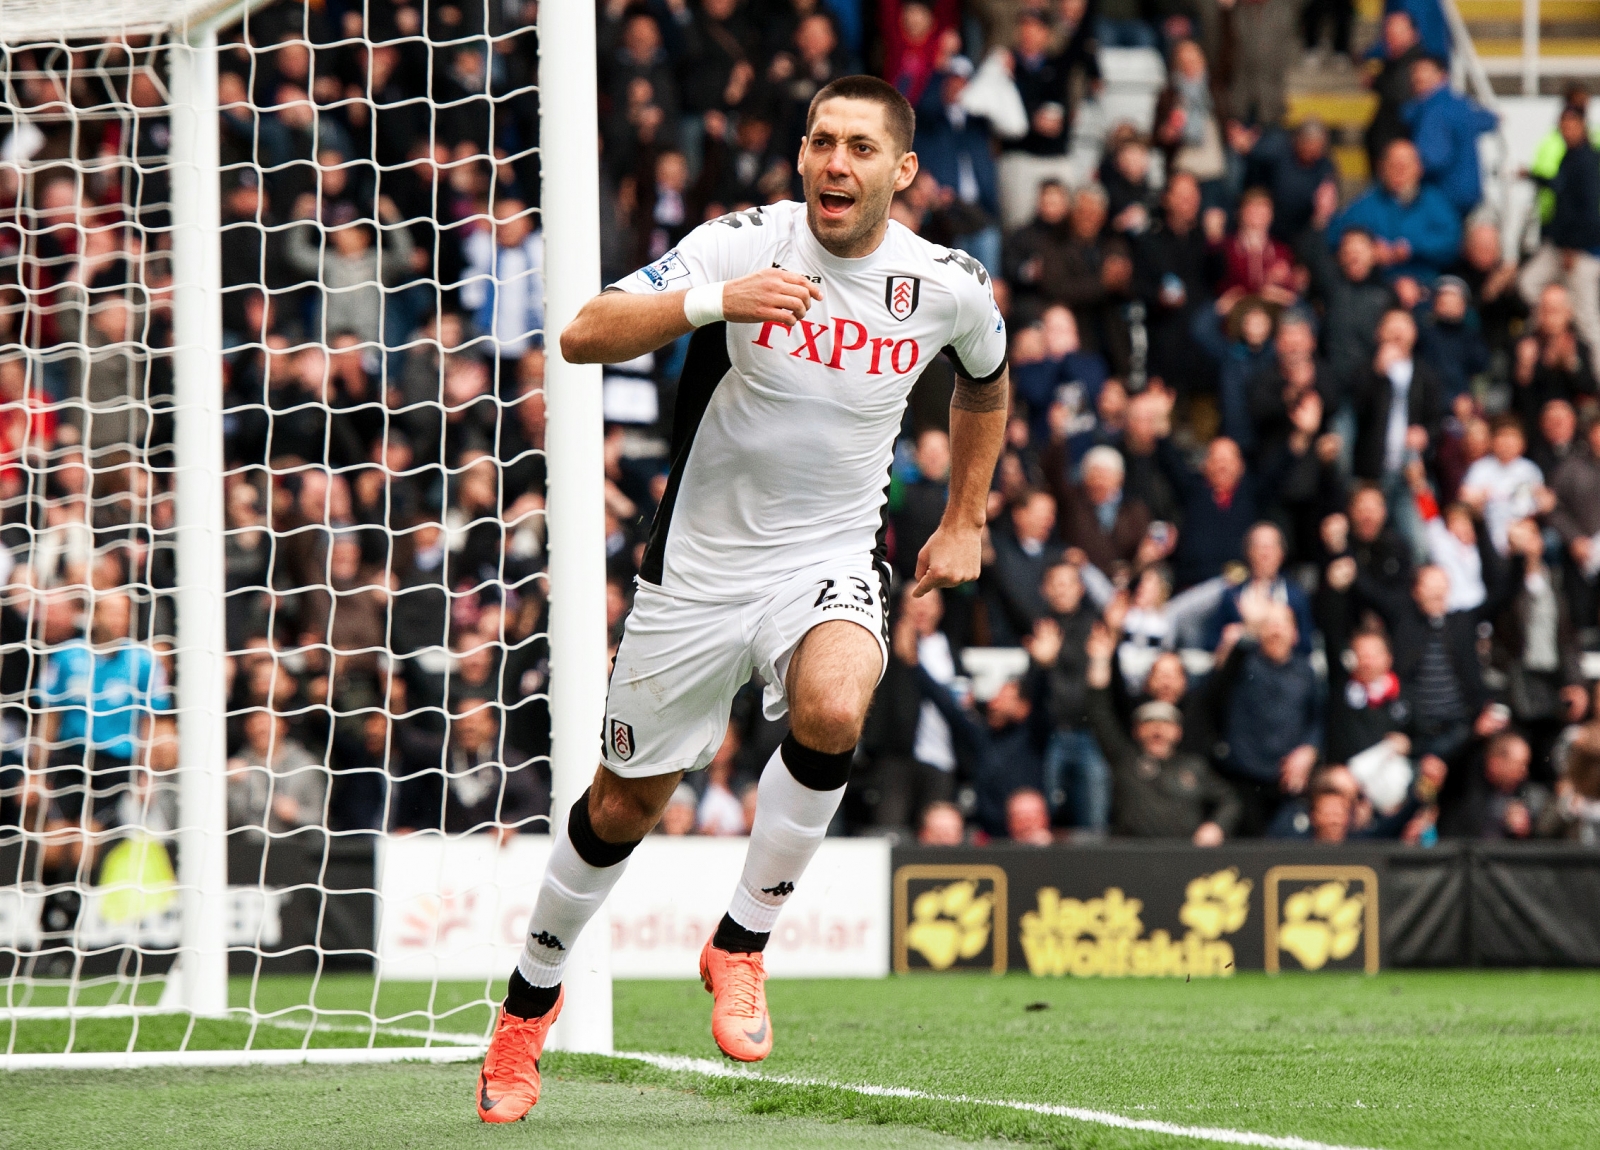 The special relationship between Fulham and American players